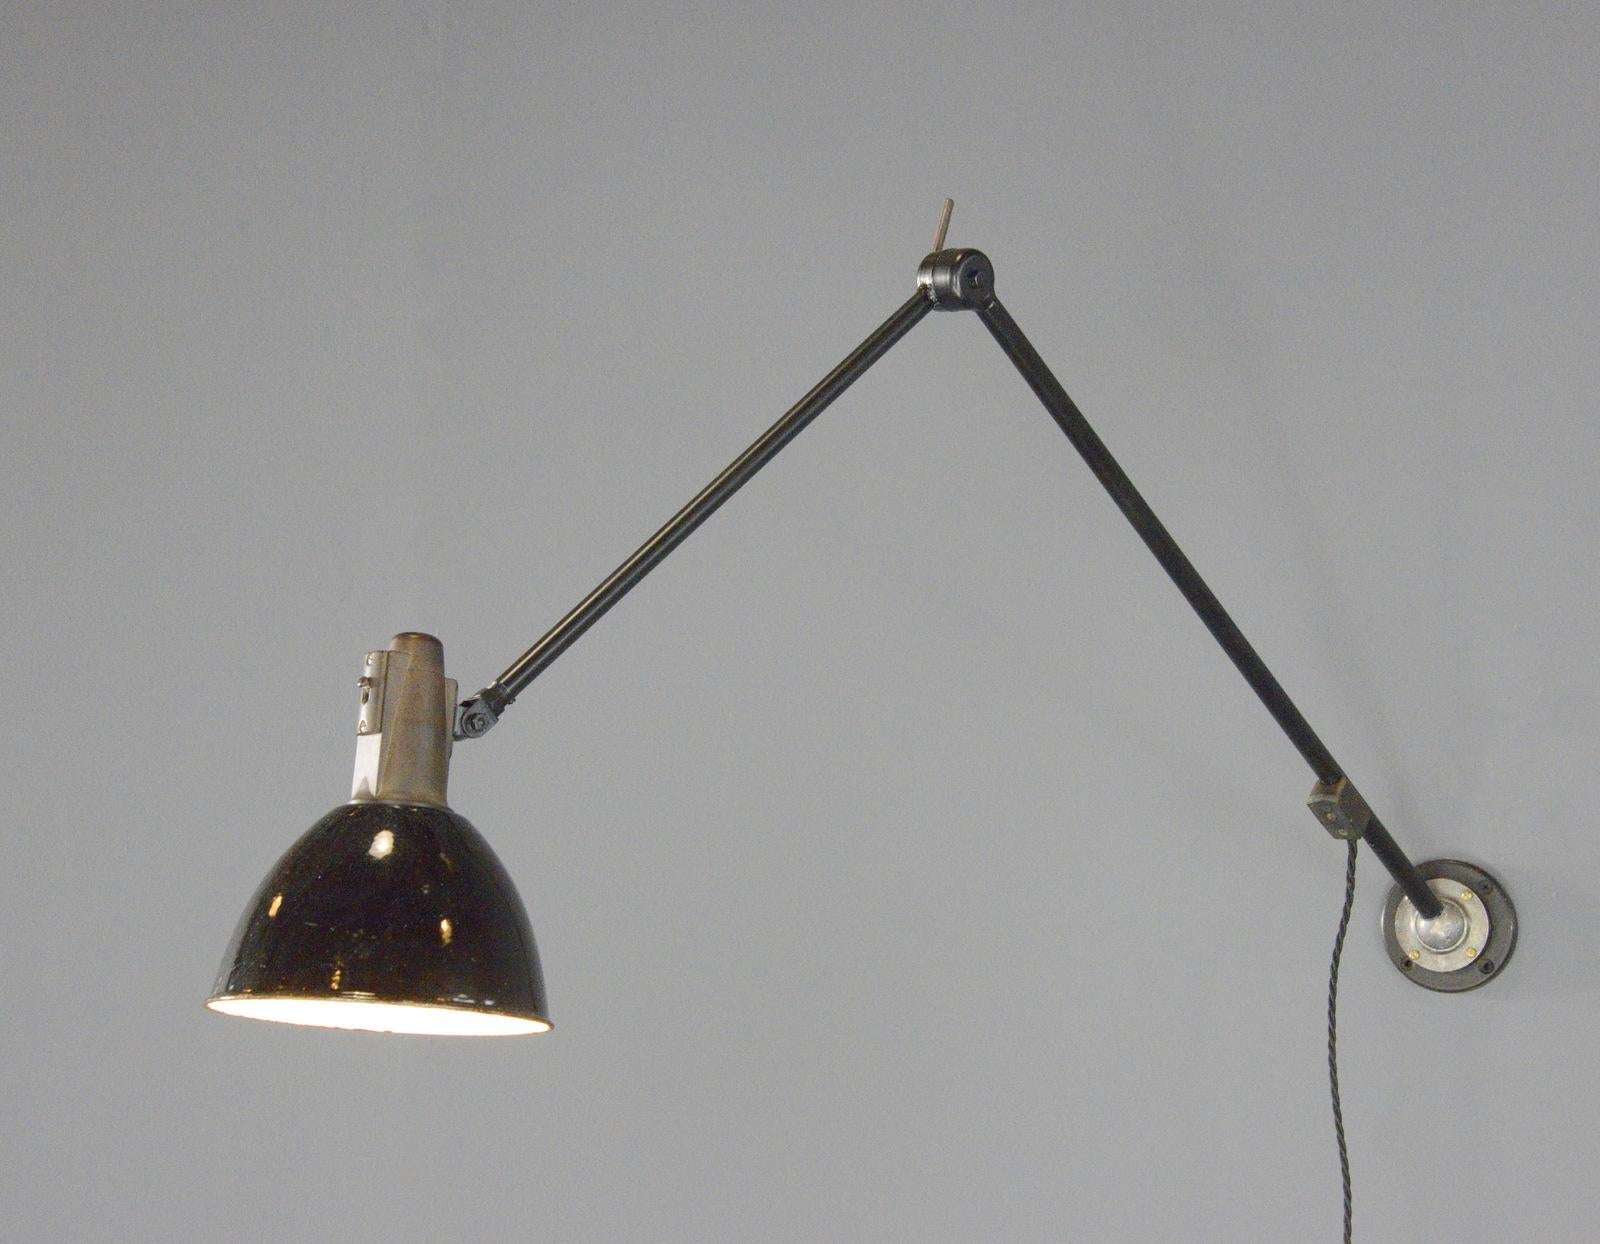 Industrial Task Lamp By Willhelm Bader Circa 1930s

- Black enamel shade
- Original bakelite head with On/Off switch
- Articulated arms
- Takes E27 fitting bulbs
- By Willhelm Bader
- German ~ 1930s
- 17cm wide 
- Extends up to 130cm from the